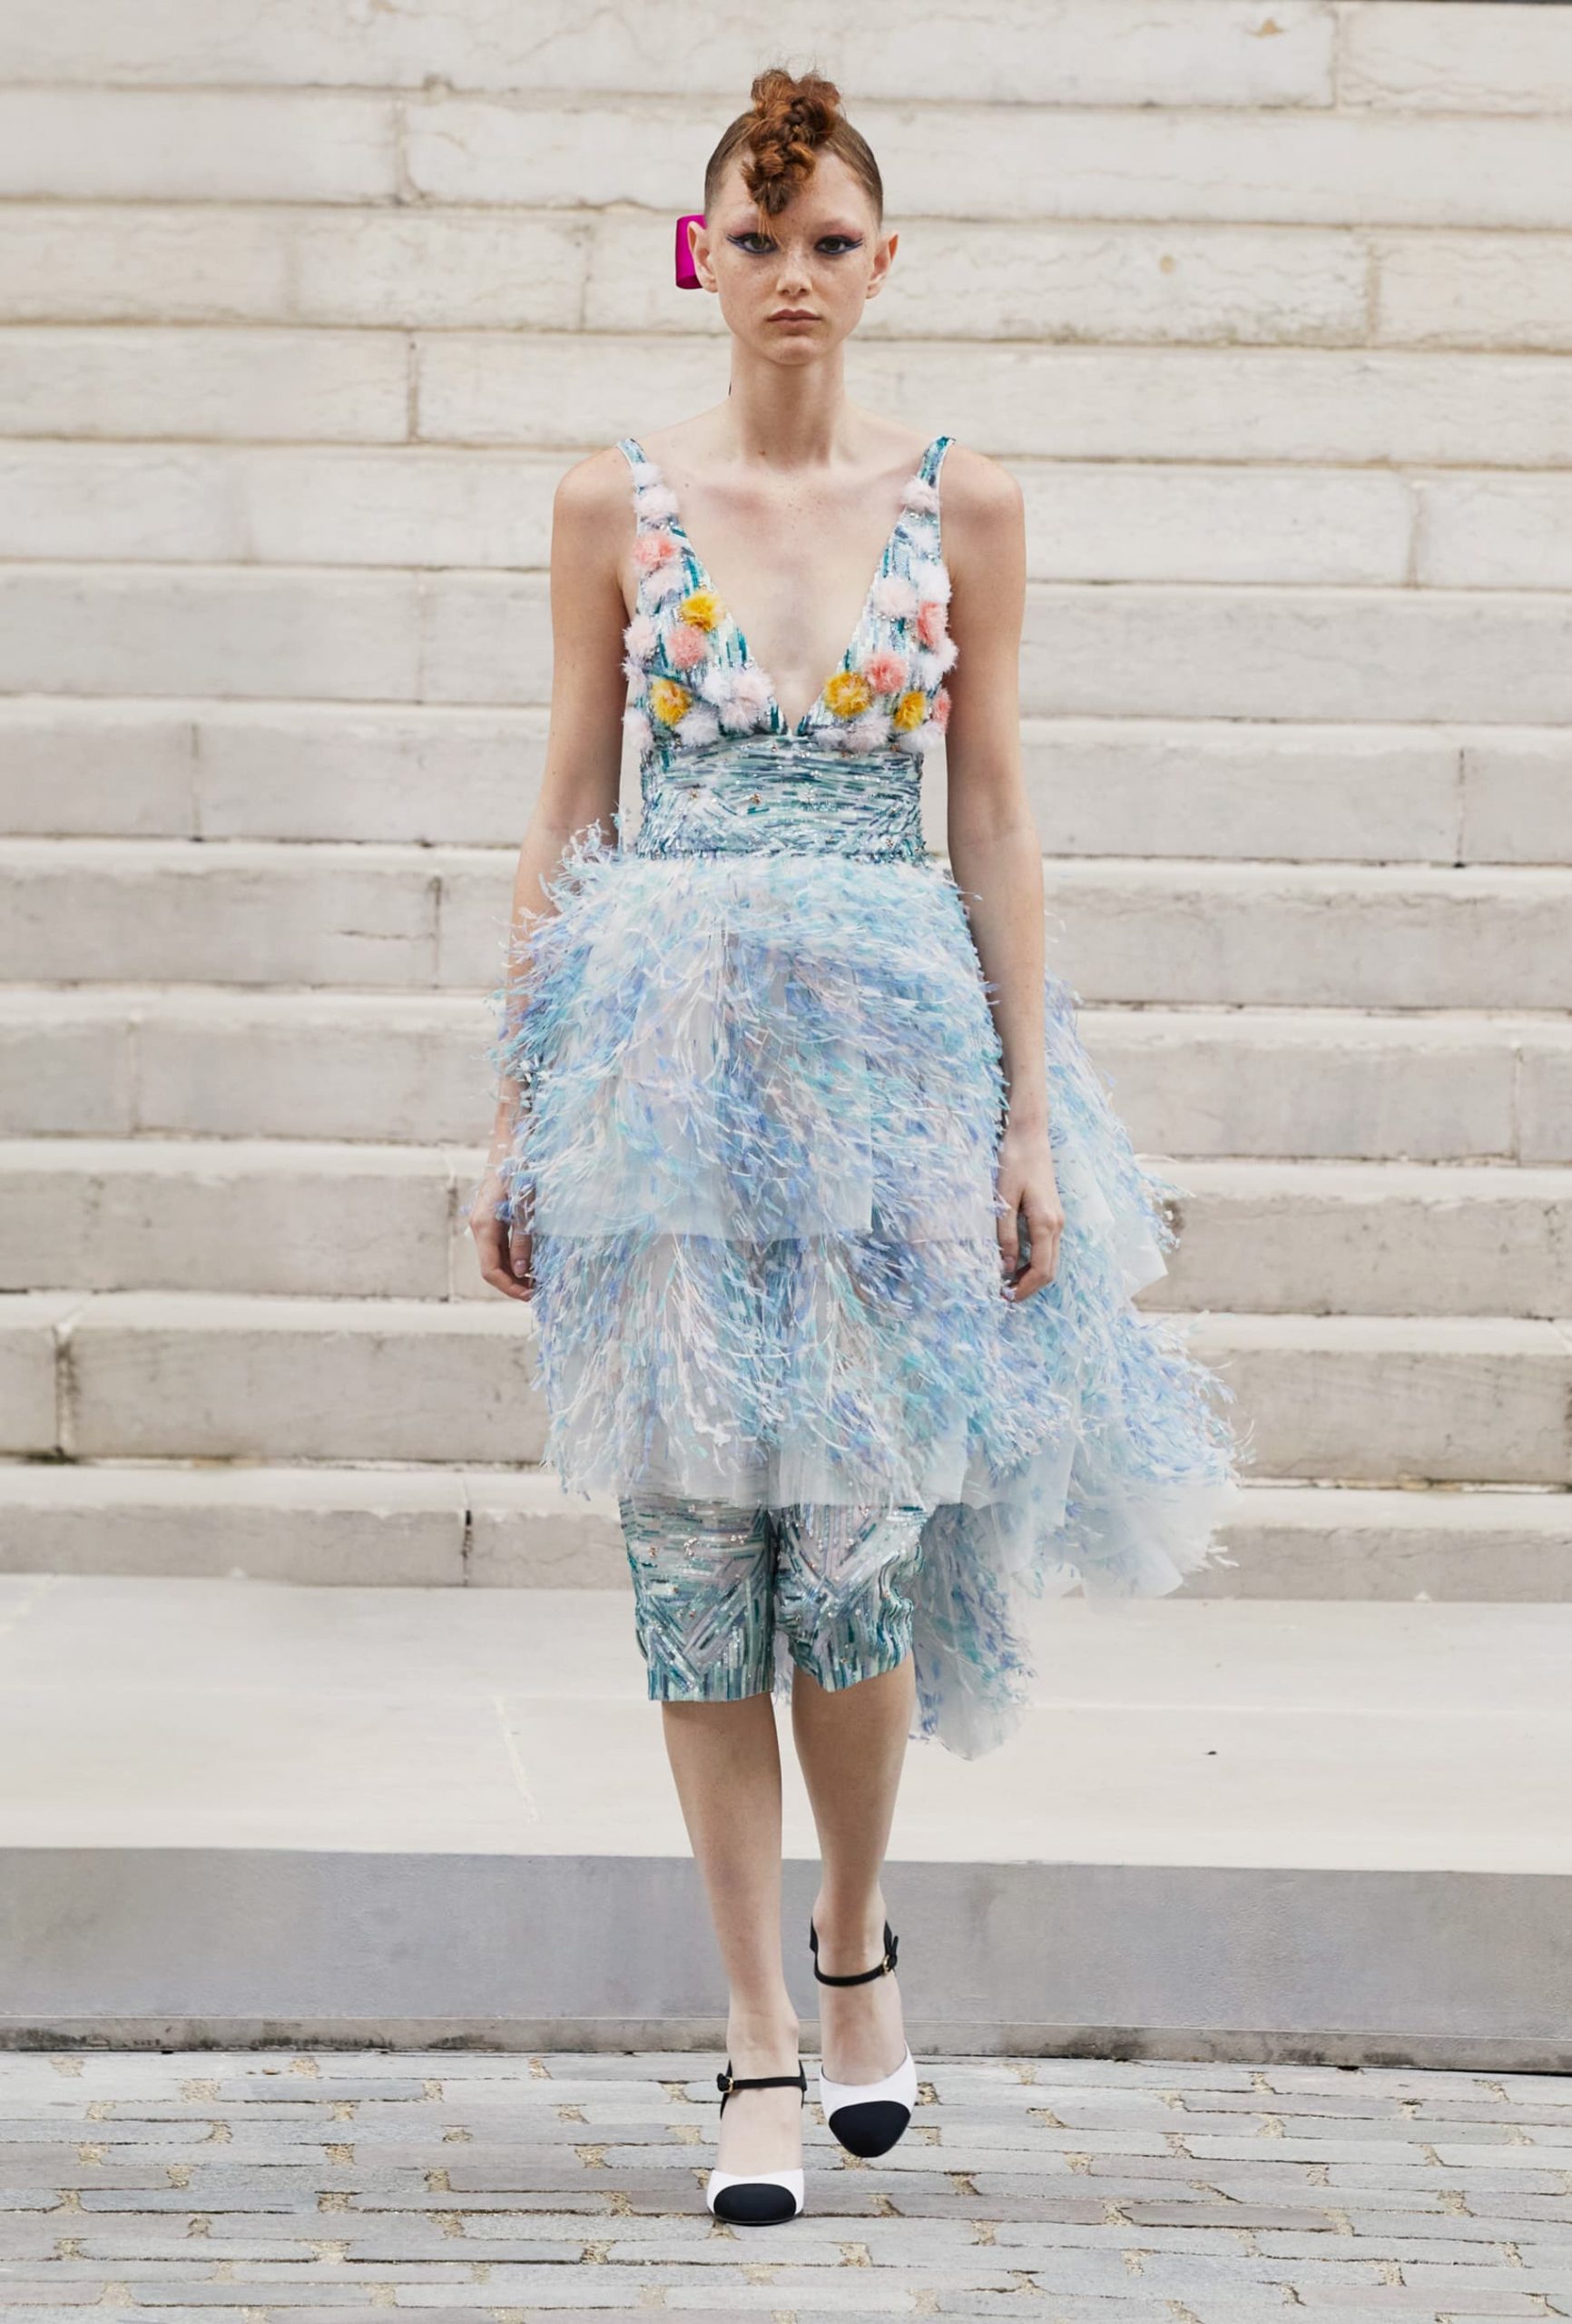 Chanel Fall 2021 Couture Fashion Show Review